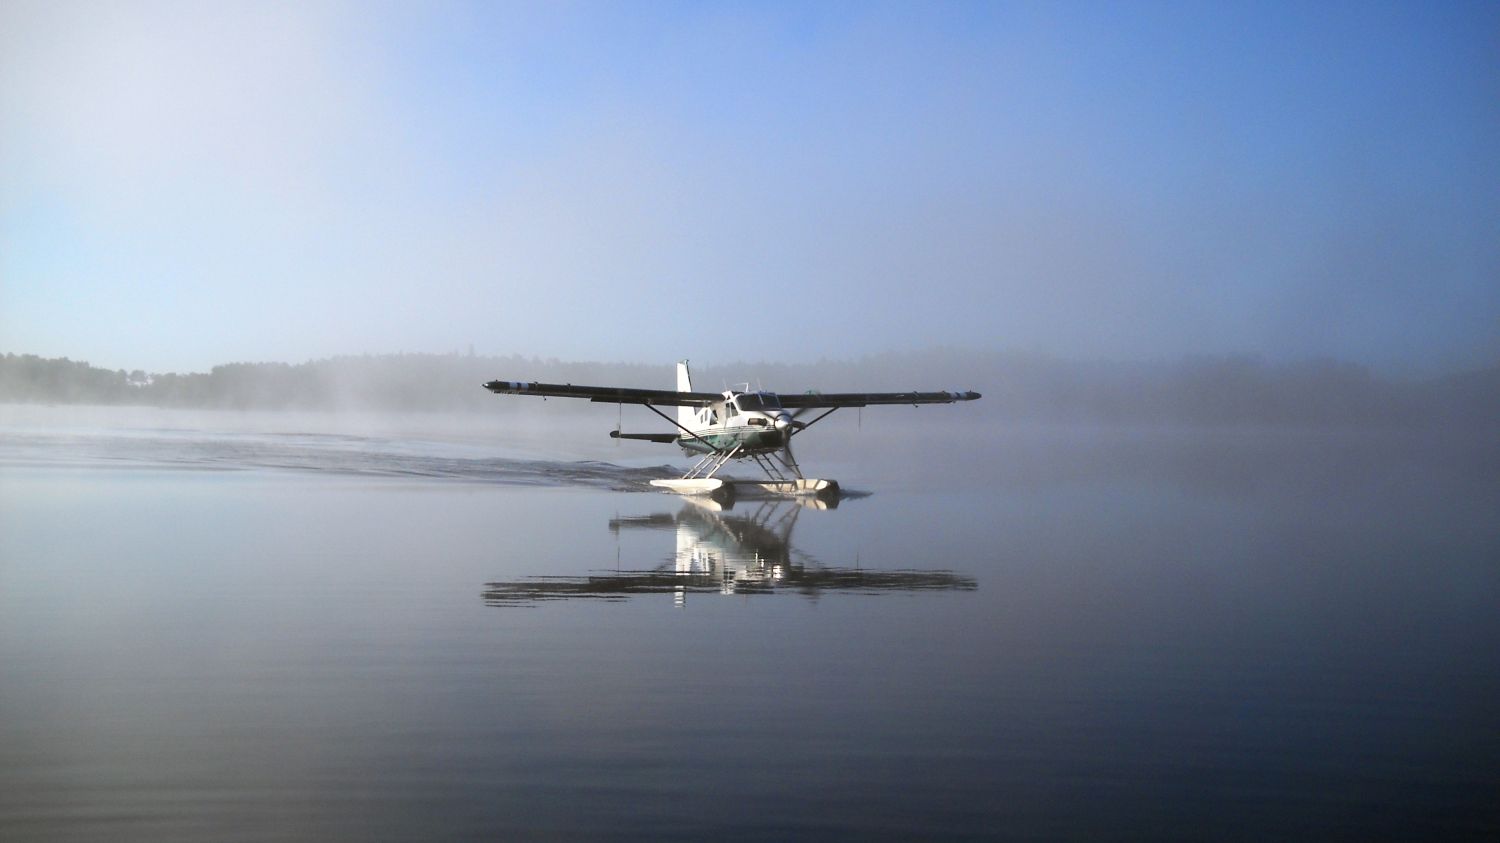 TIPS FOR GOING ON A FLY-IN FISHING TRIP